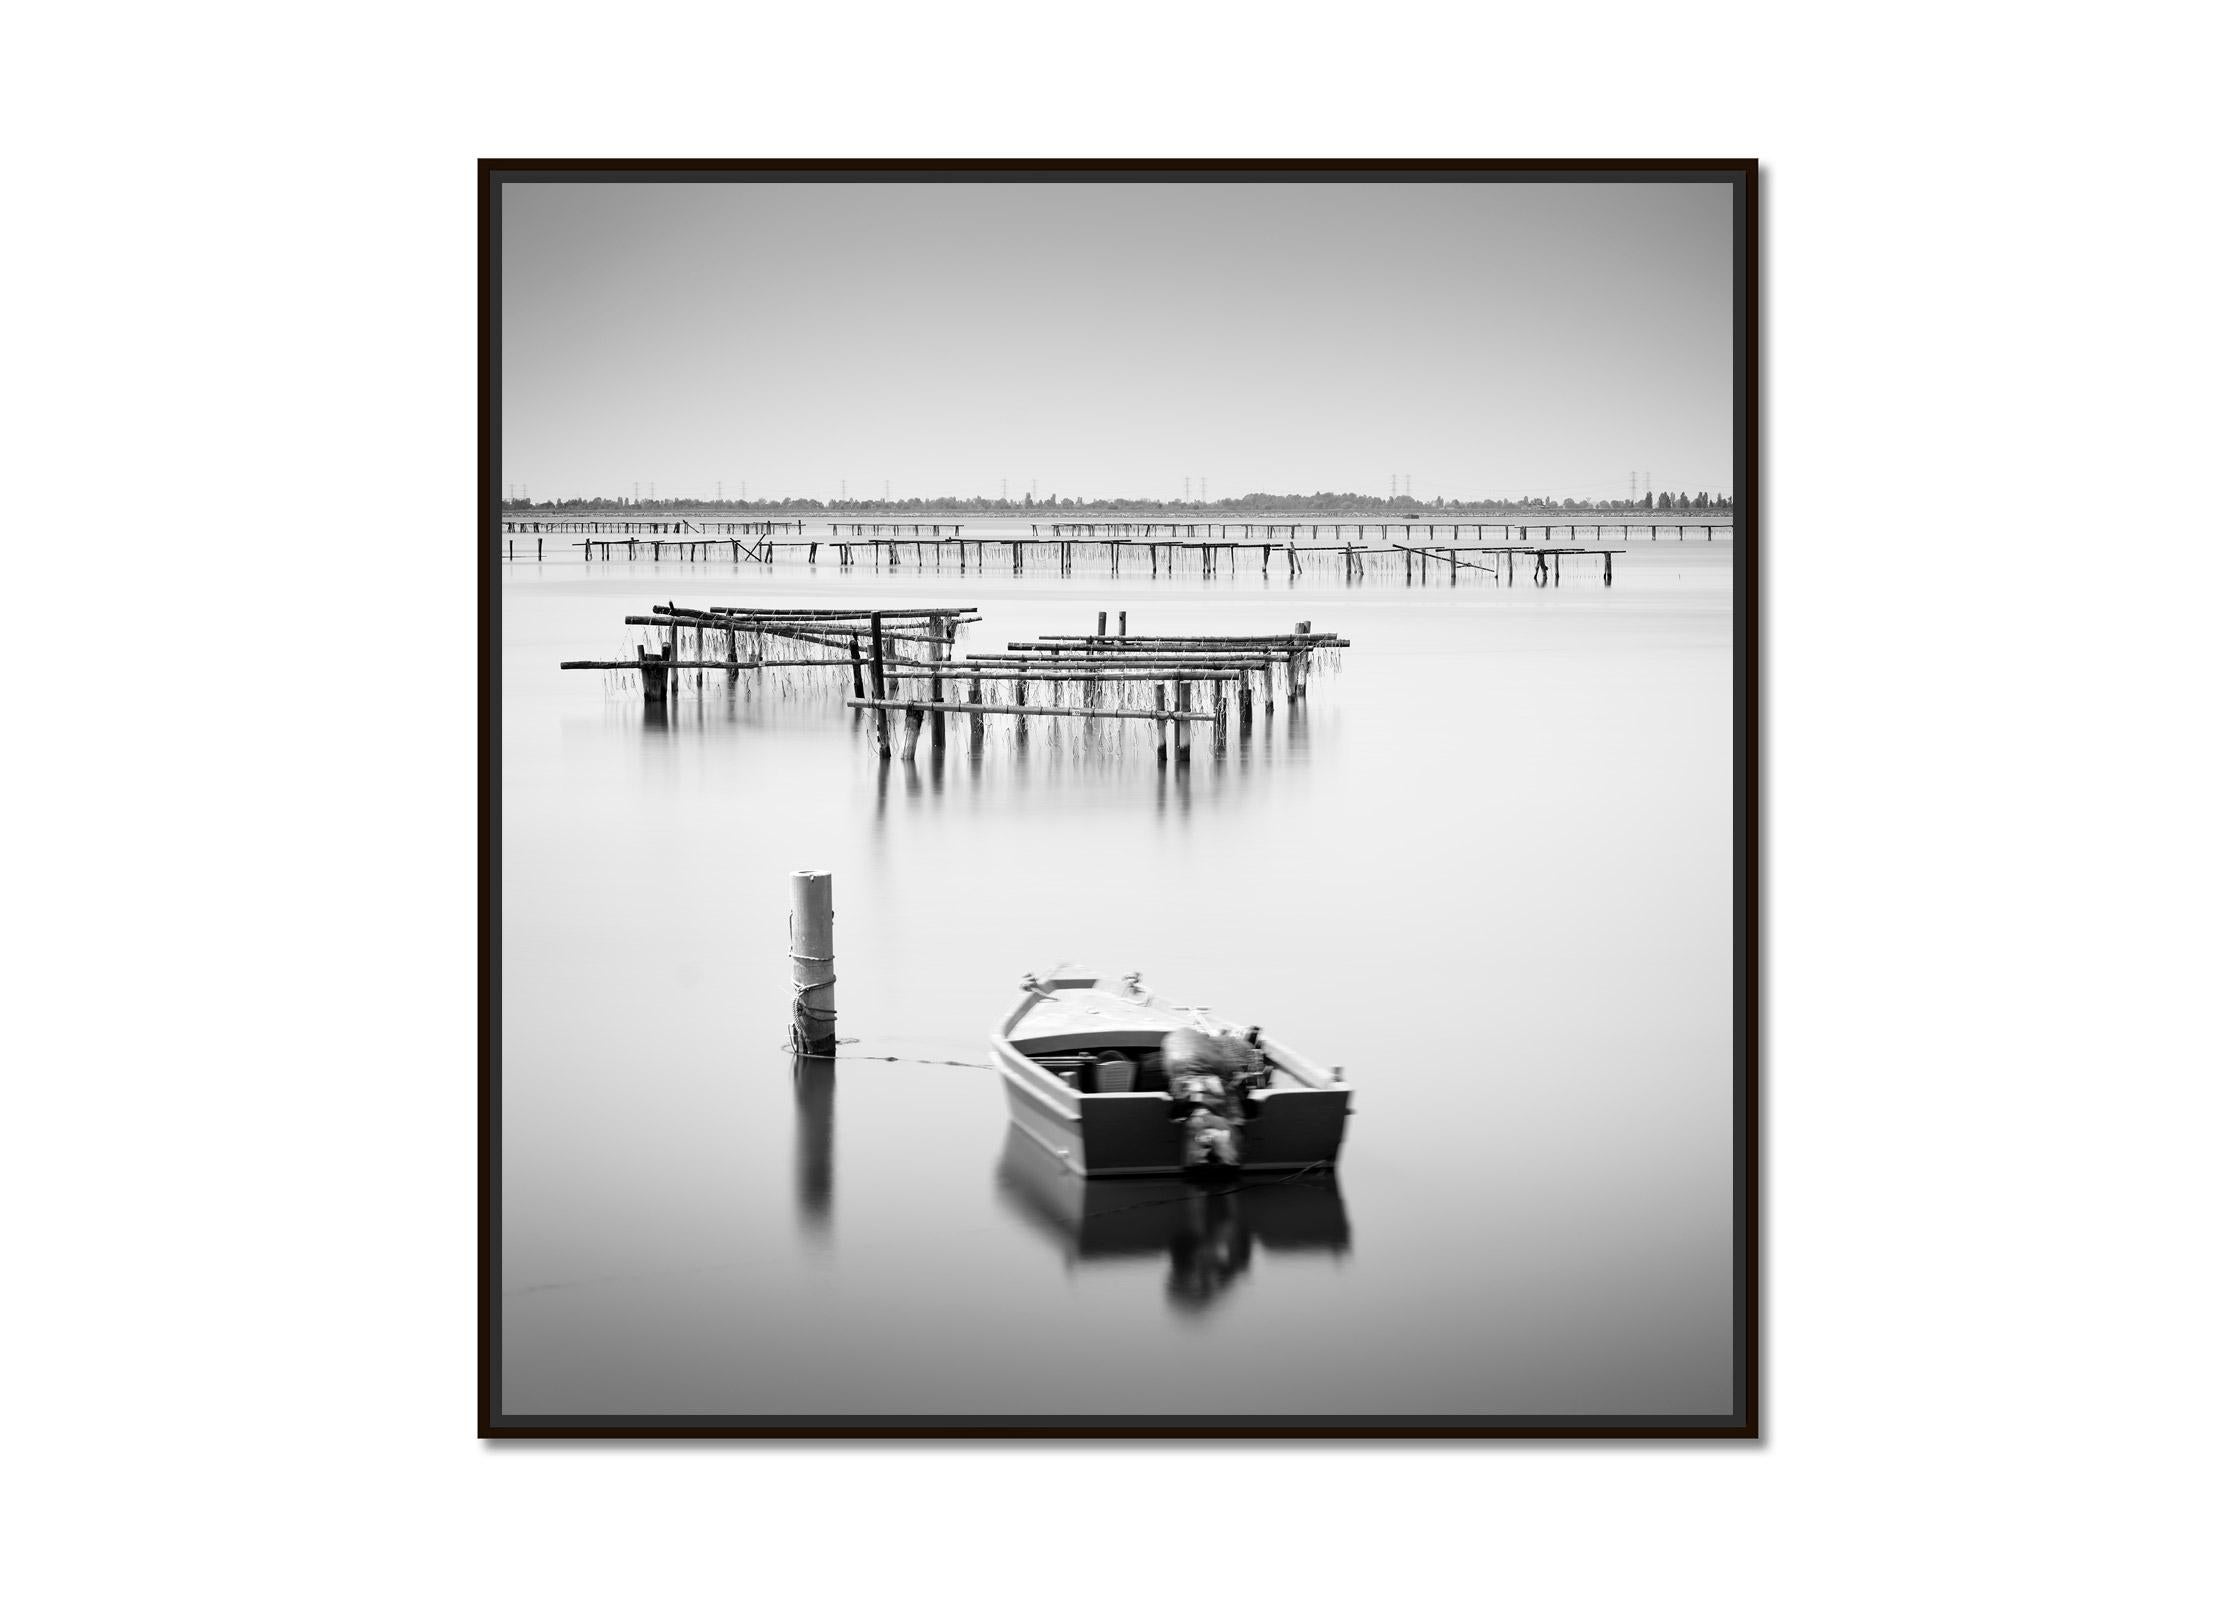 Aquaculture Structures, fishing boat, long exposure, black and white, landscape - Photograph by Gerald Berghammer